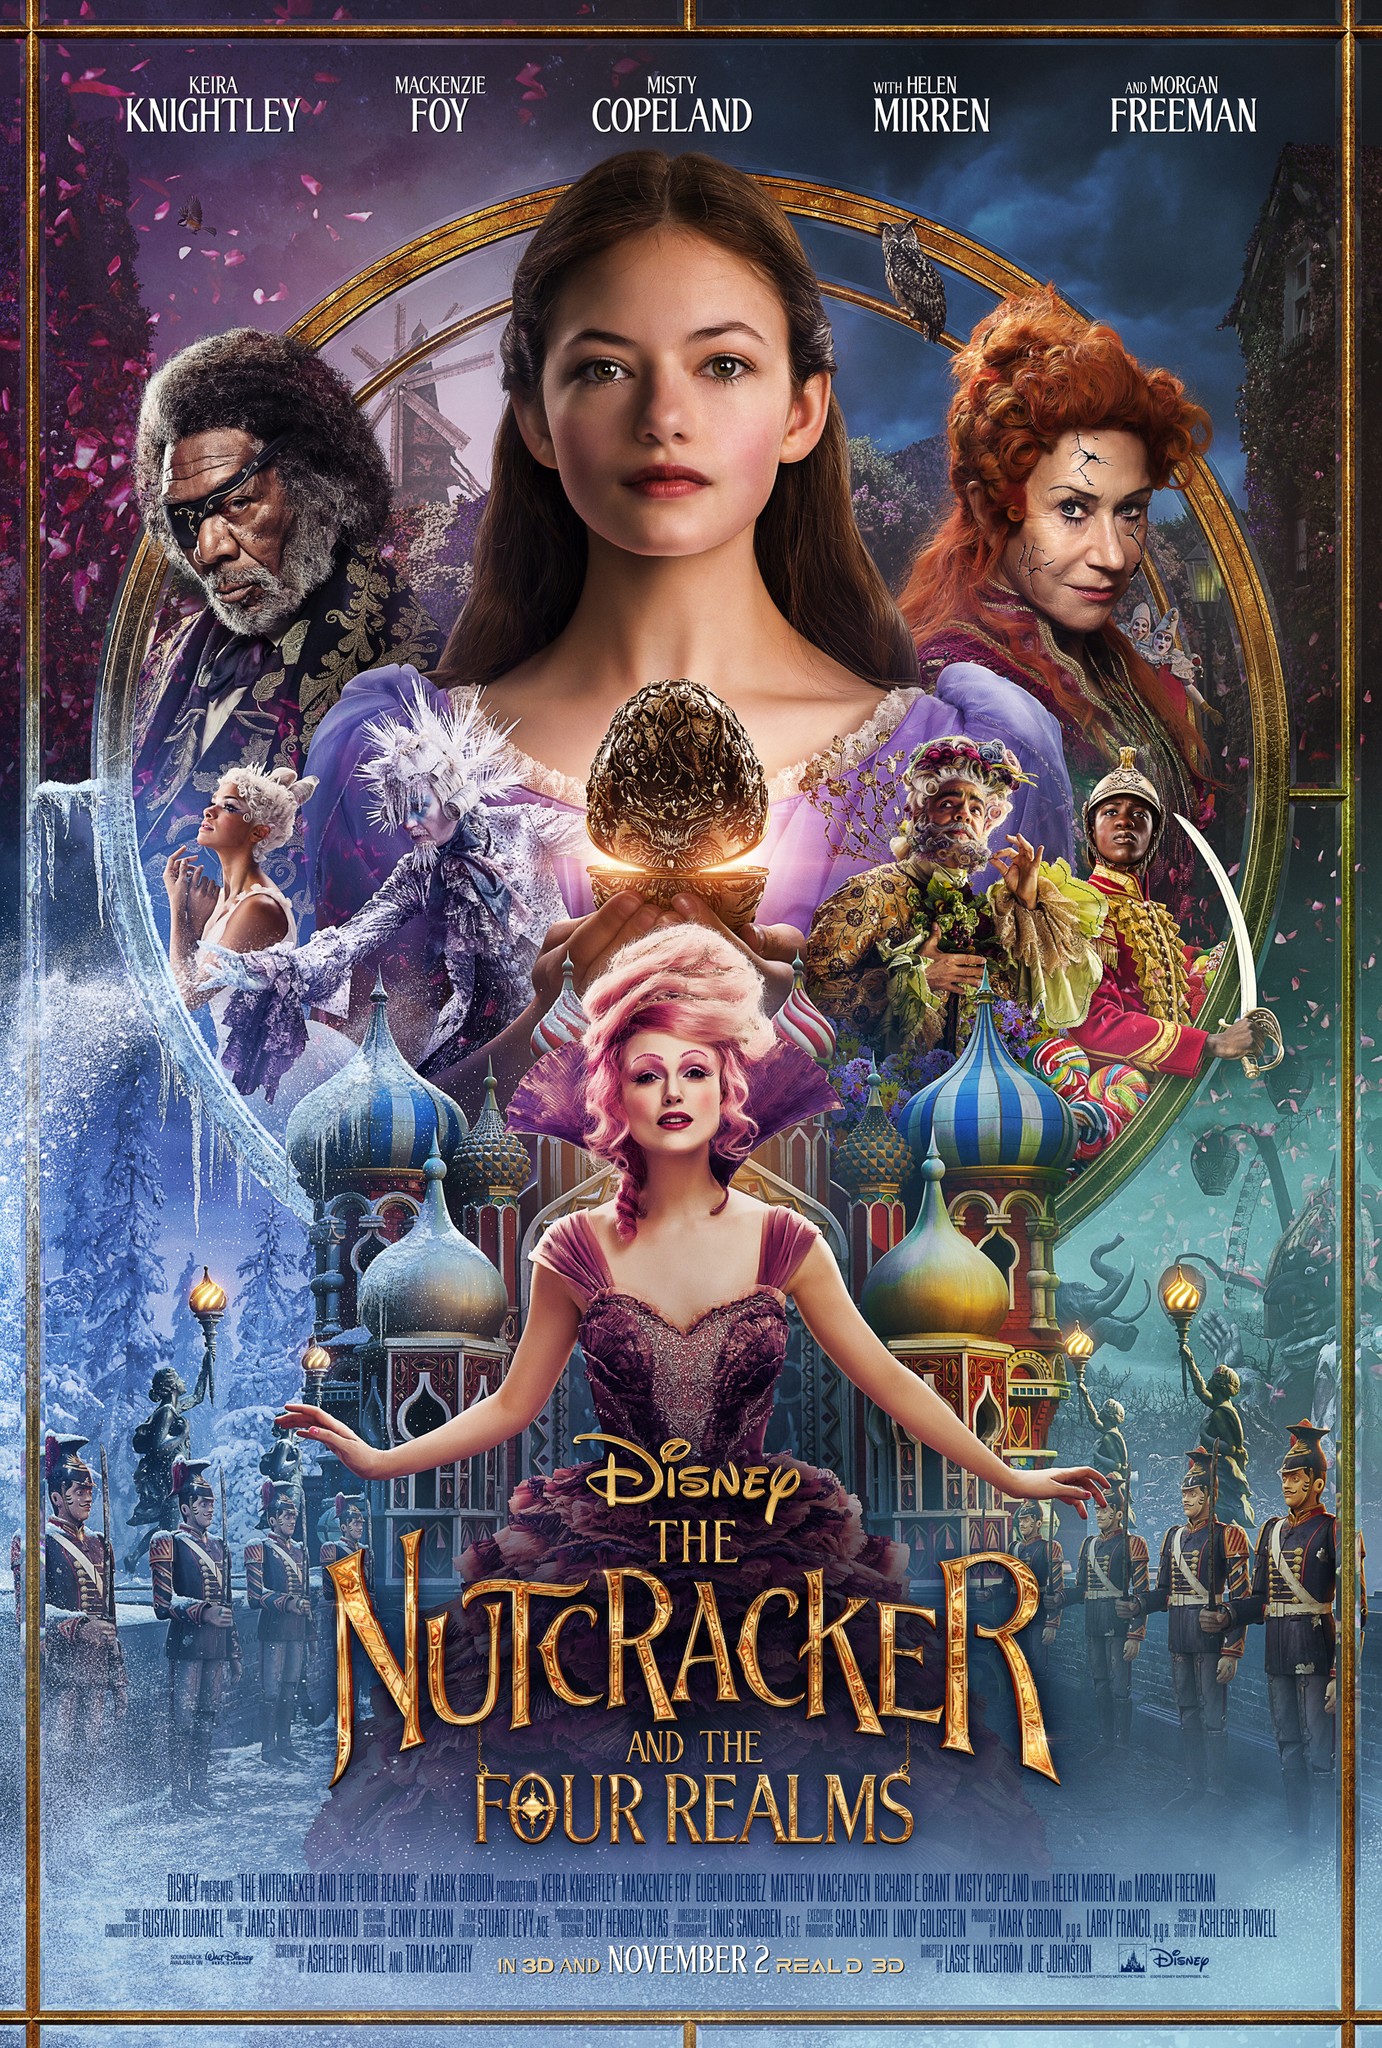 The Nutcracker and the Four Realms (2018) 480p BluRay Hindi Dual Audio Movie ESubs [350MB]